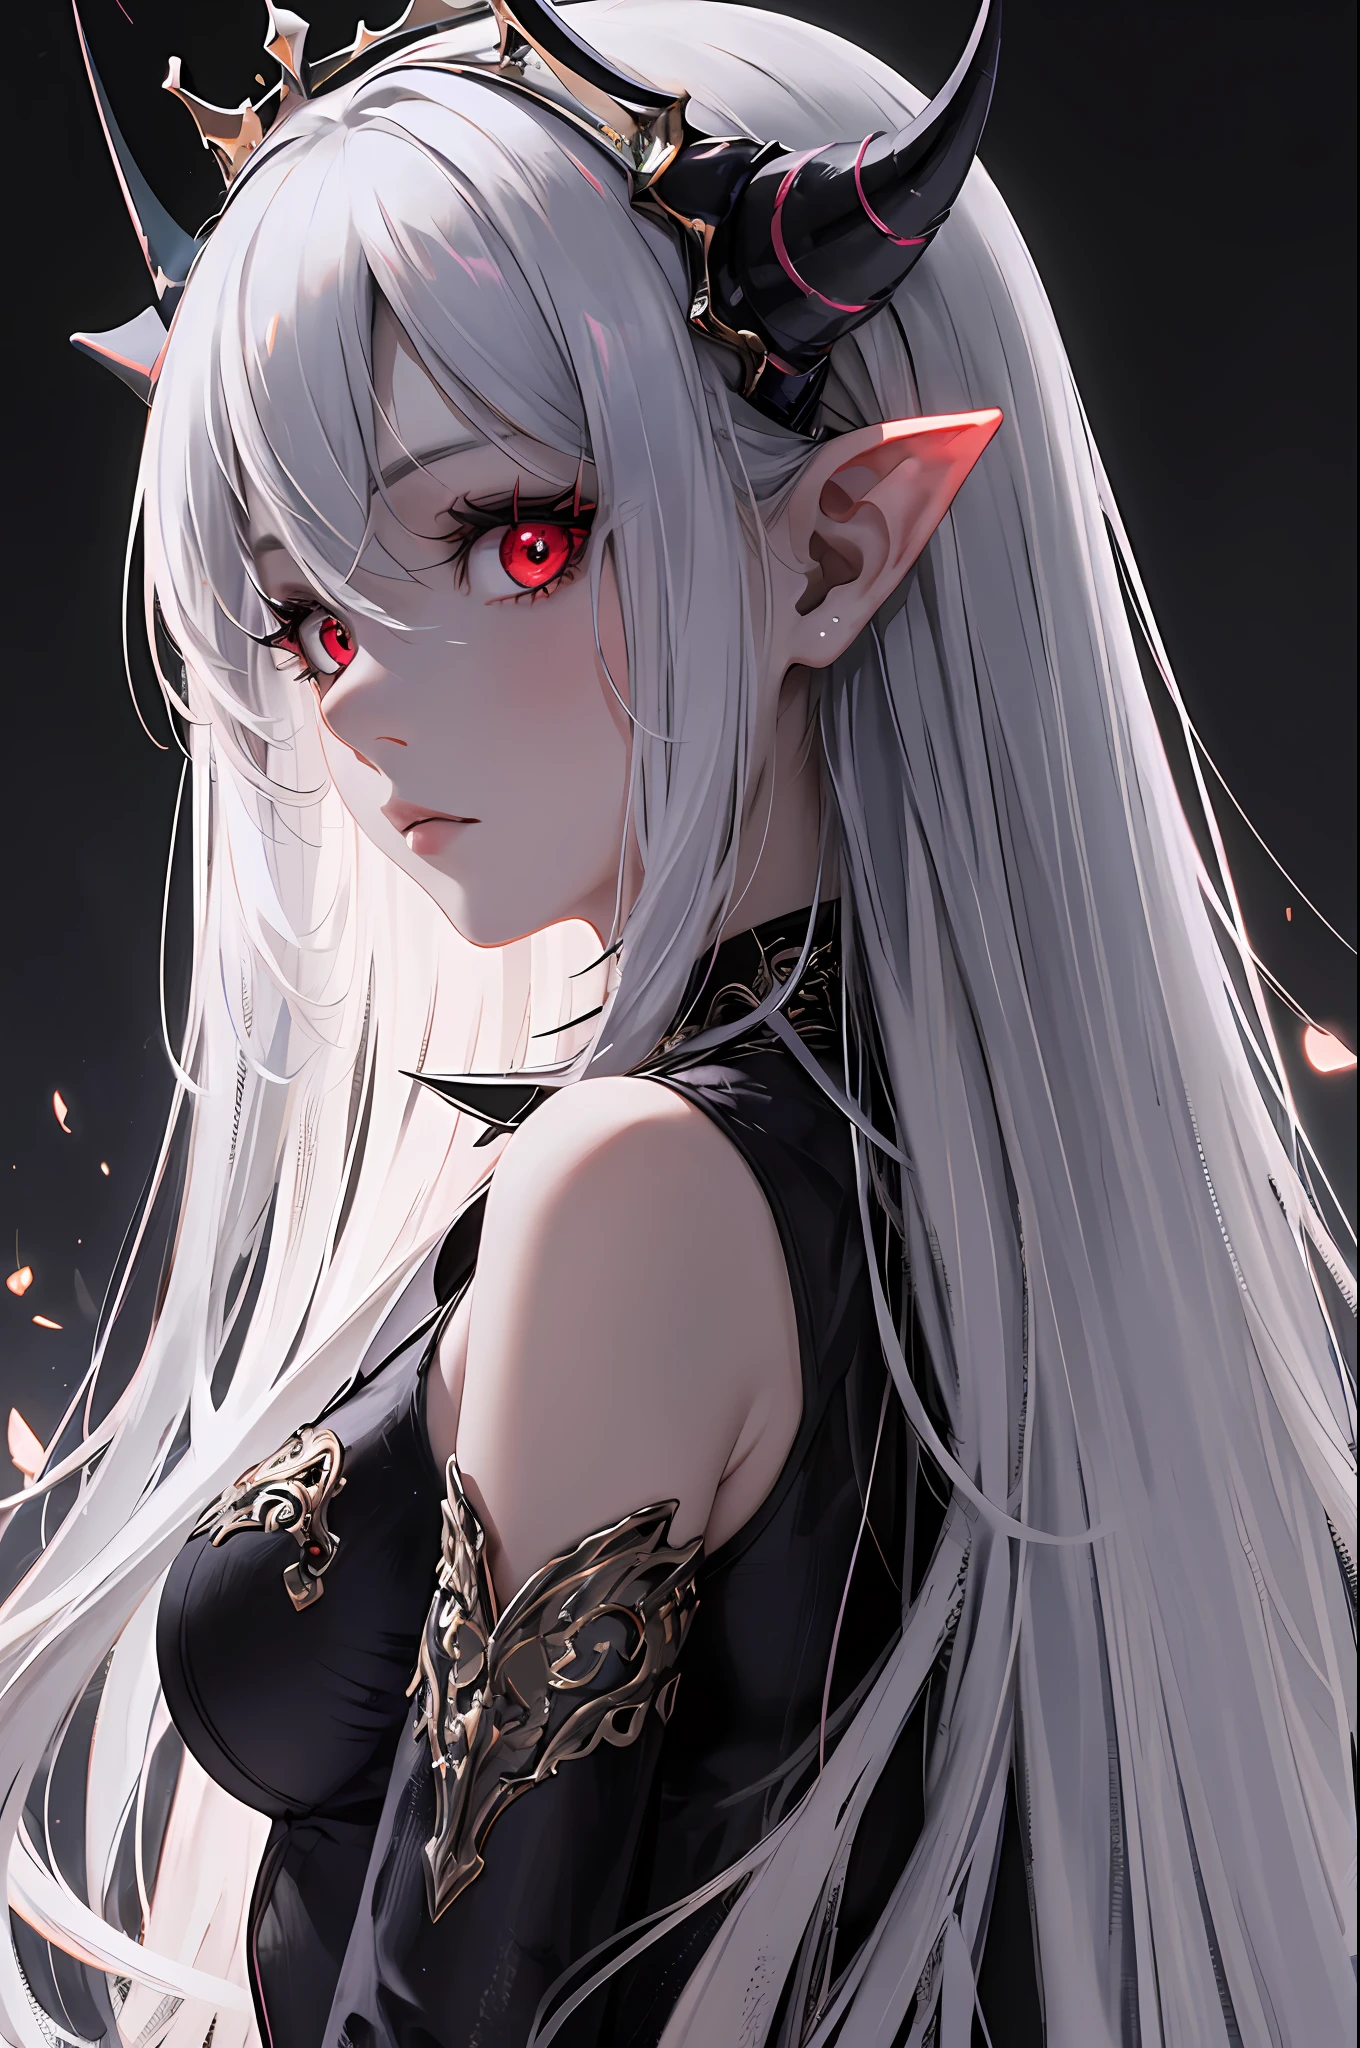 masterpiece, best quality, super detailed, absurd, colorful, 1 girl, solo, (pure red eyes:1.0), (gray hair, long hair, straight hair, monocular hair:1.0), fine eyes, big eyes, eyelashes, (upper body:0.8), monster girl, side view, glowing eyes, tilted head, night, black suit, pointed ears, horror, darkness, black background, looking at the audience, crown, high contrast, backlight, (standing: 0.8), halo, fractal background, chaos, spiral, demon horn, Energy, hell